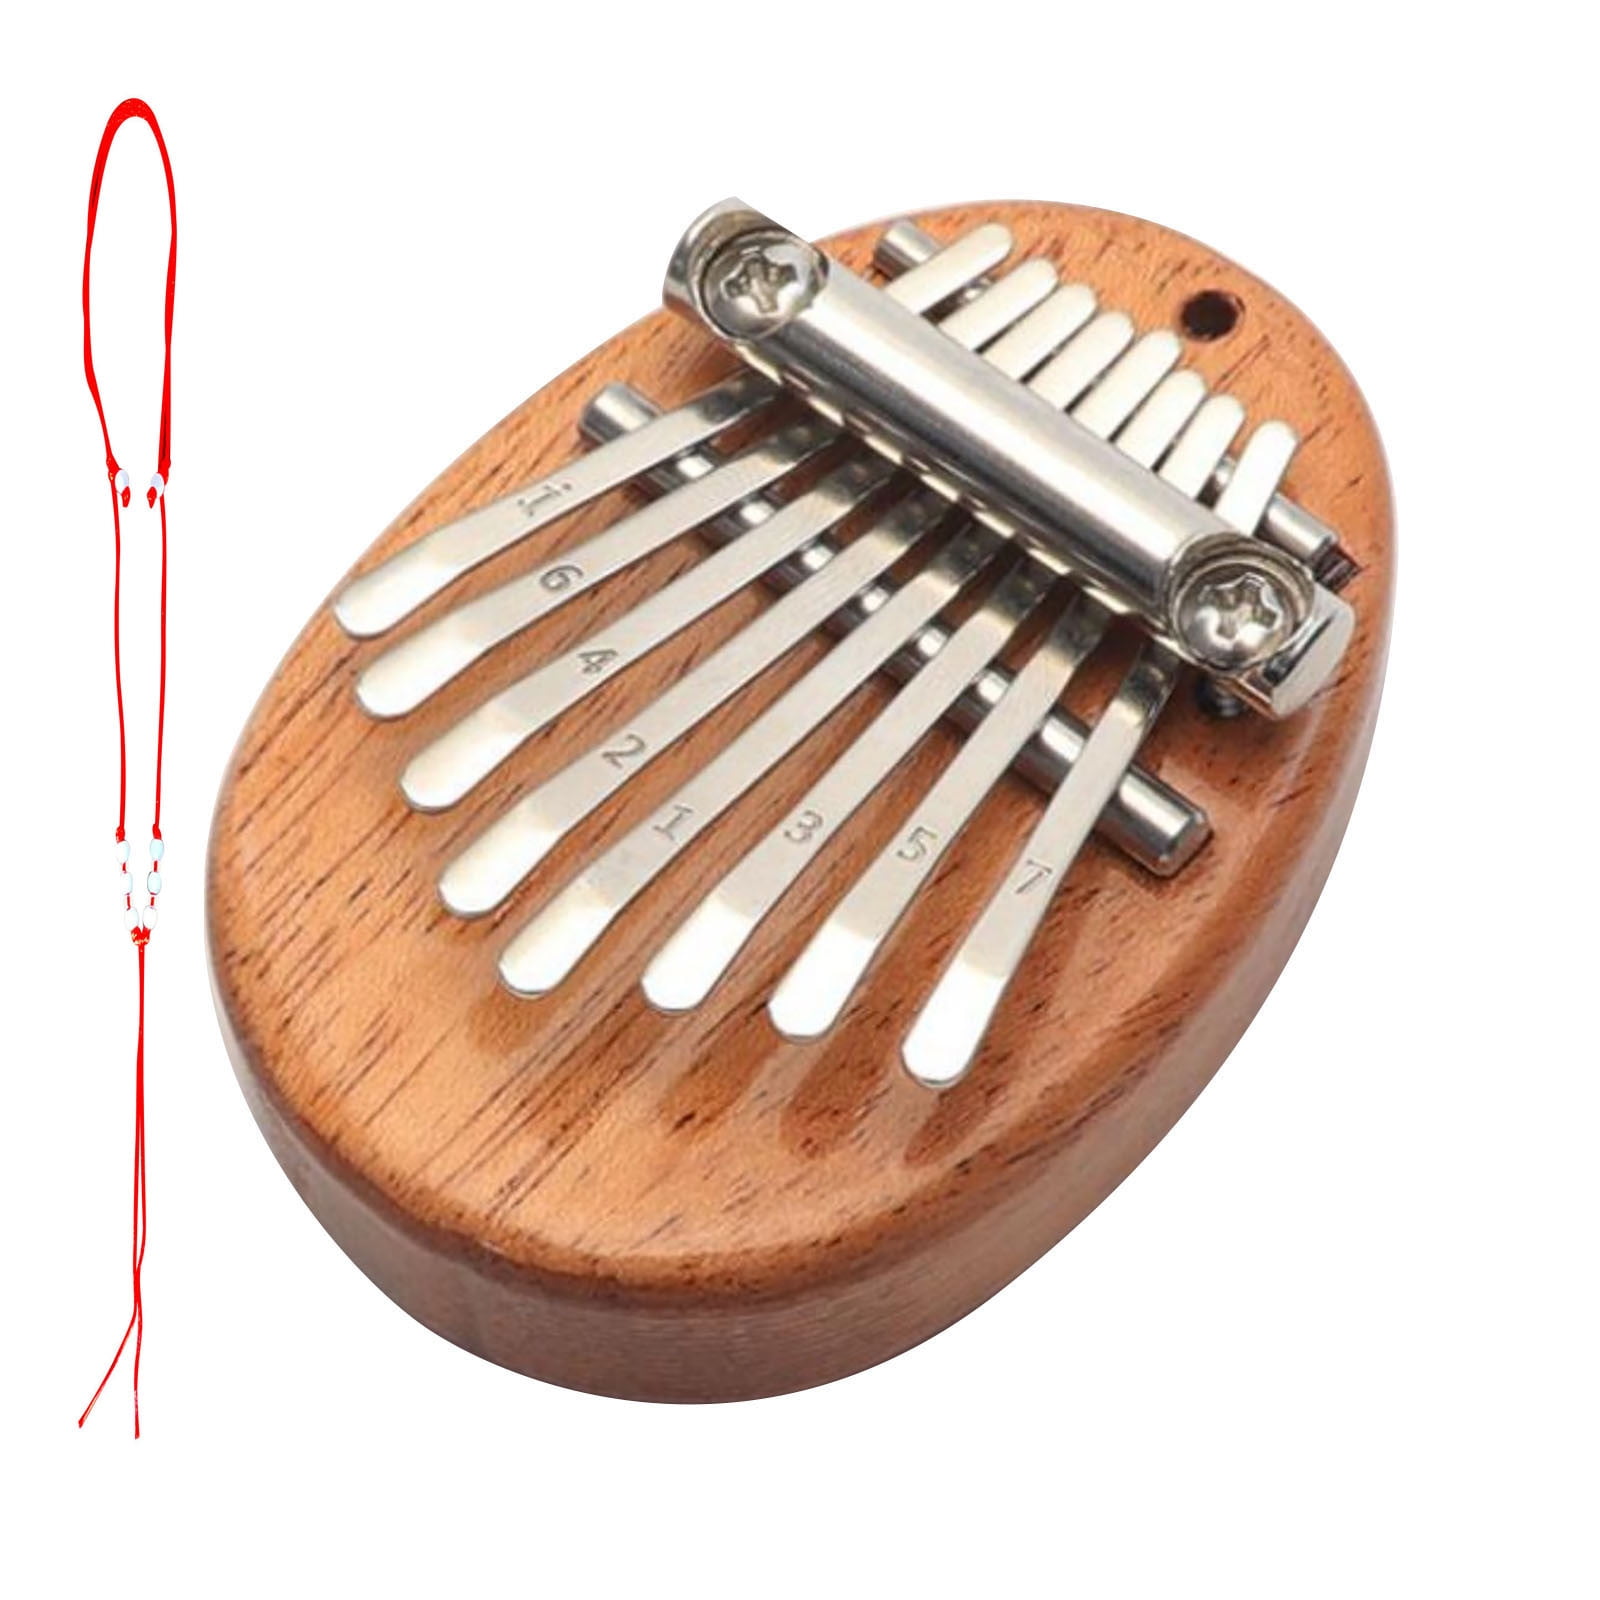 1 Piece Mini Marimbas Palm Size Marimbas Musical Instrument Finger Thumb Piano for Kids and Adults Beginners Music Learners Pendant Decoration